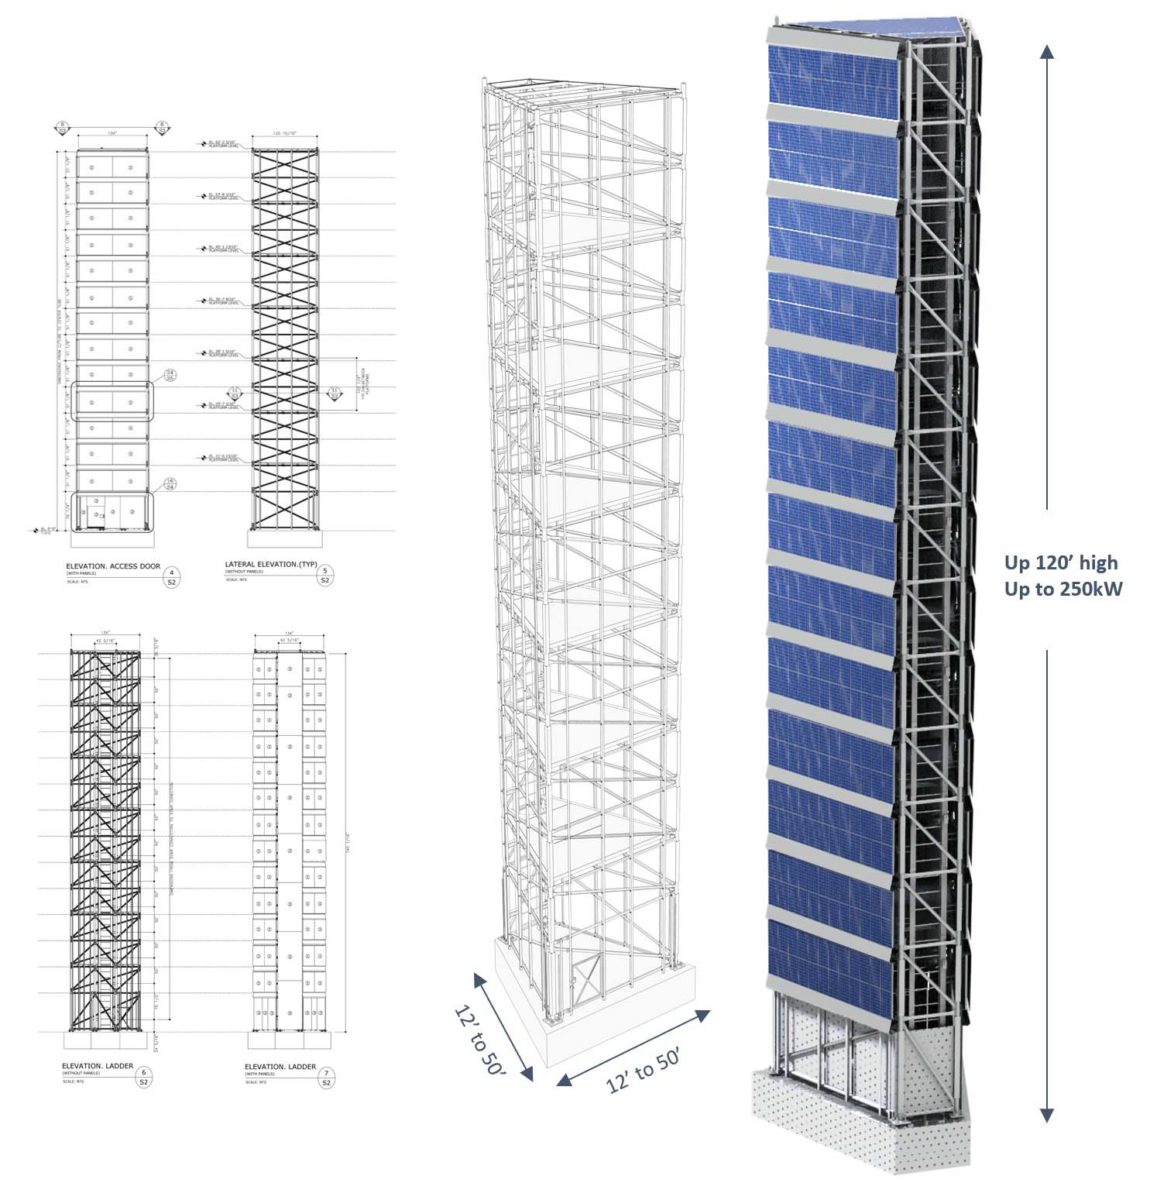 Solar tower of power shows benefits of vertical installations